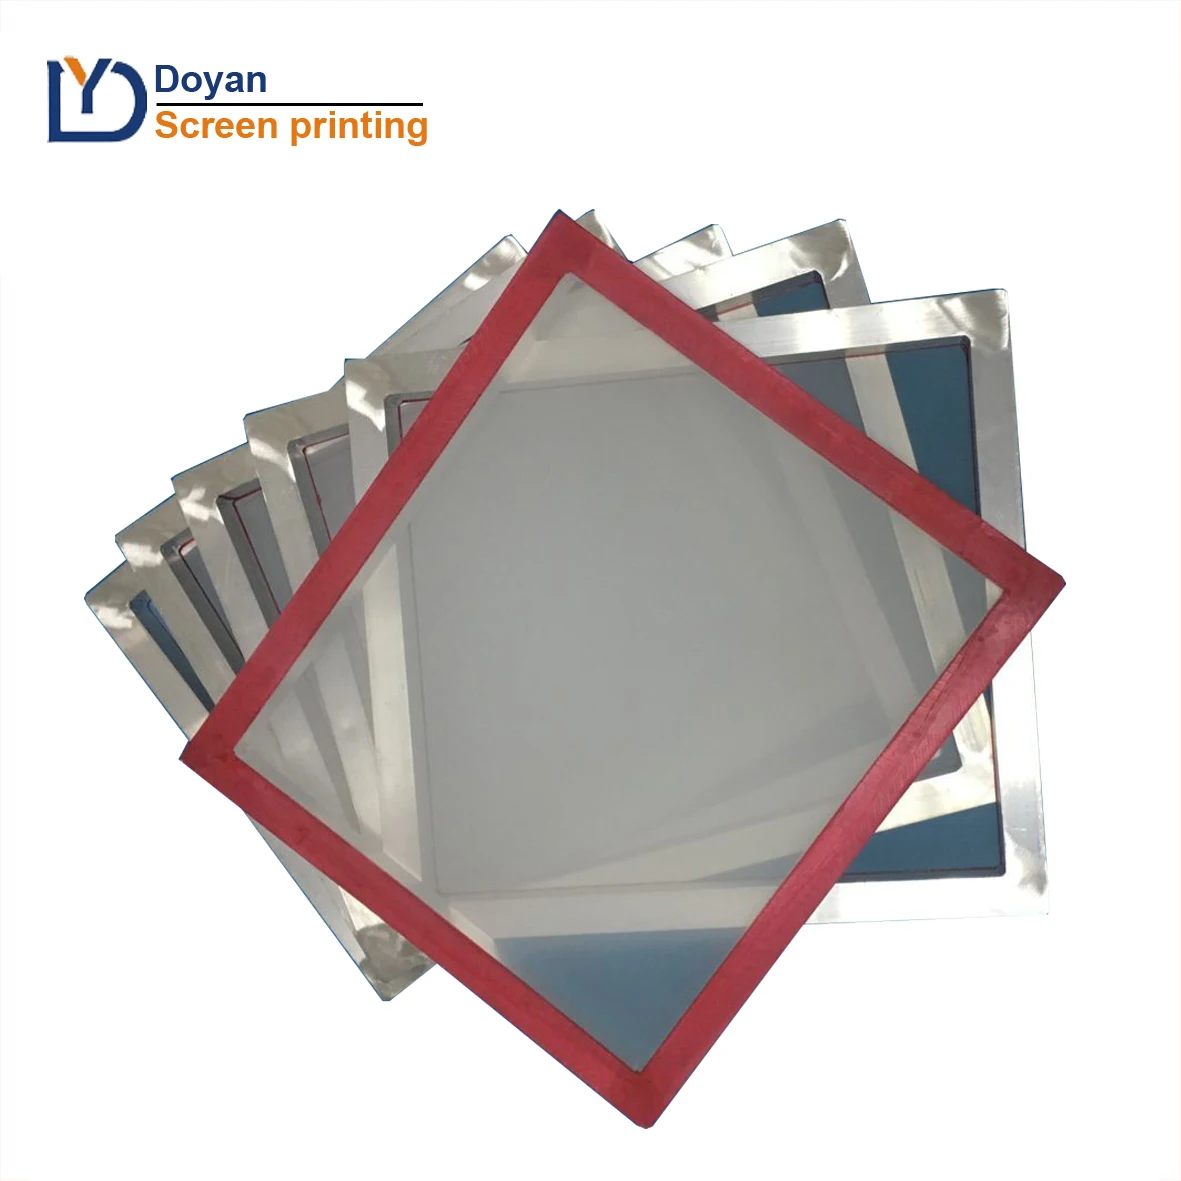 Screen printing frame with mesh